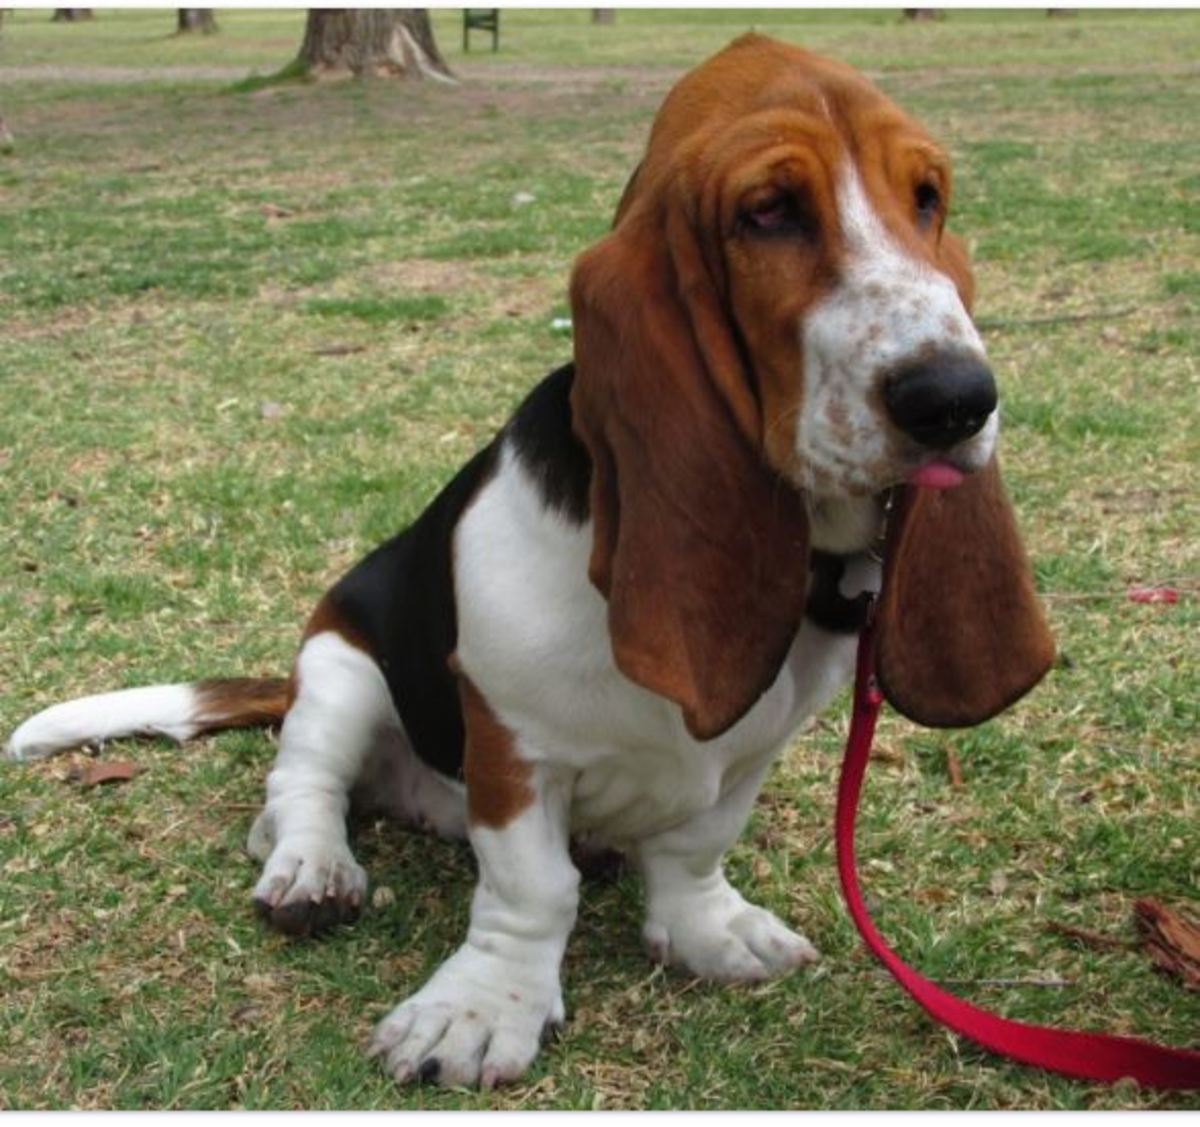 Take your basset hound on leash in the yard to potty. 